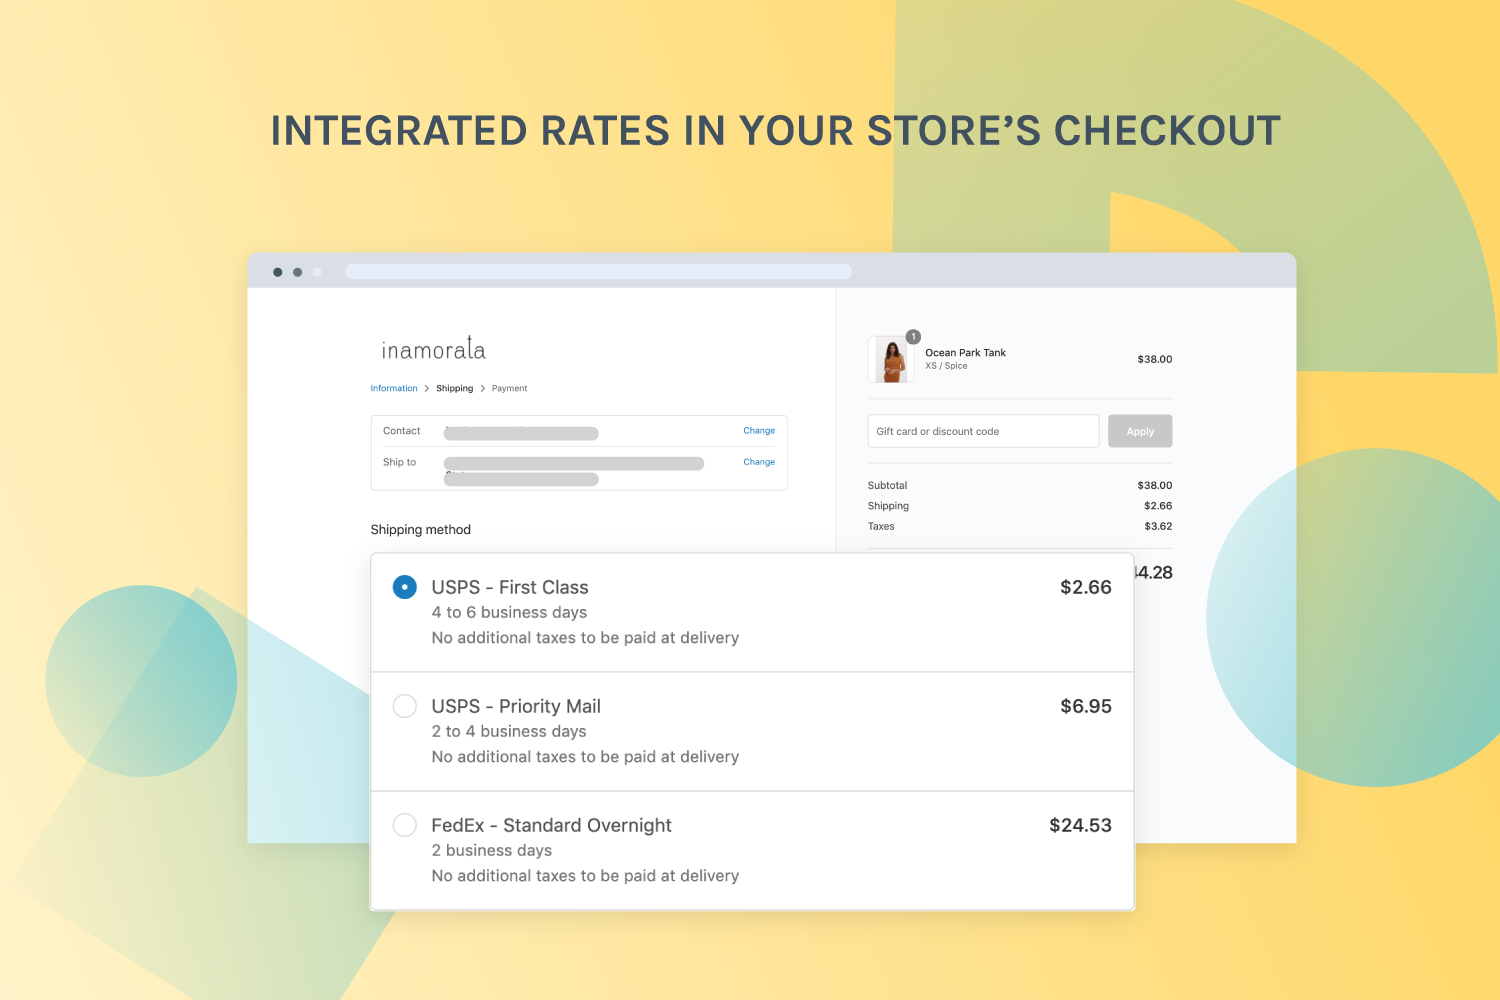 Integrated rates in your store's checkout